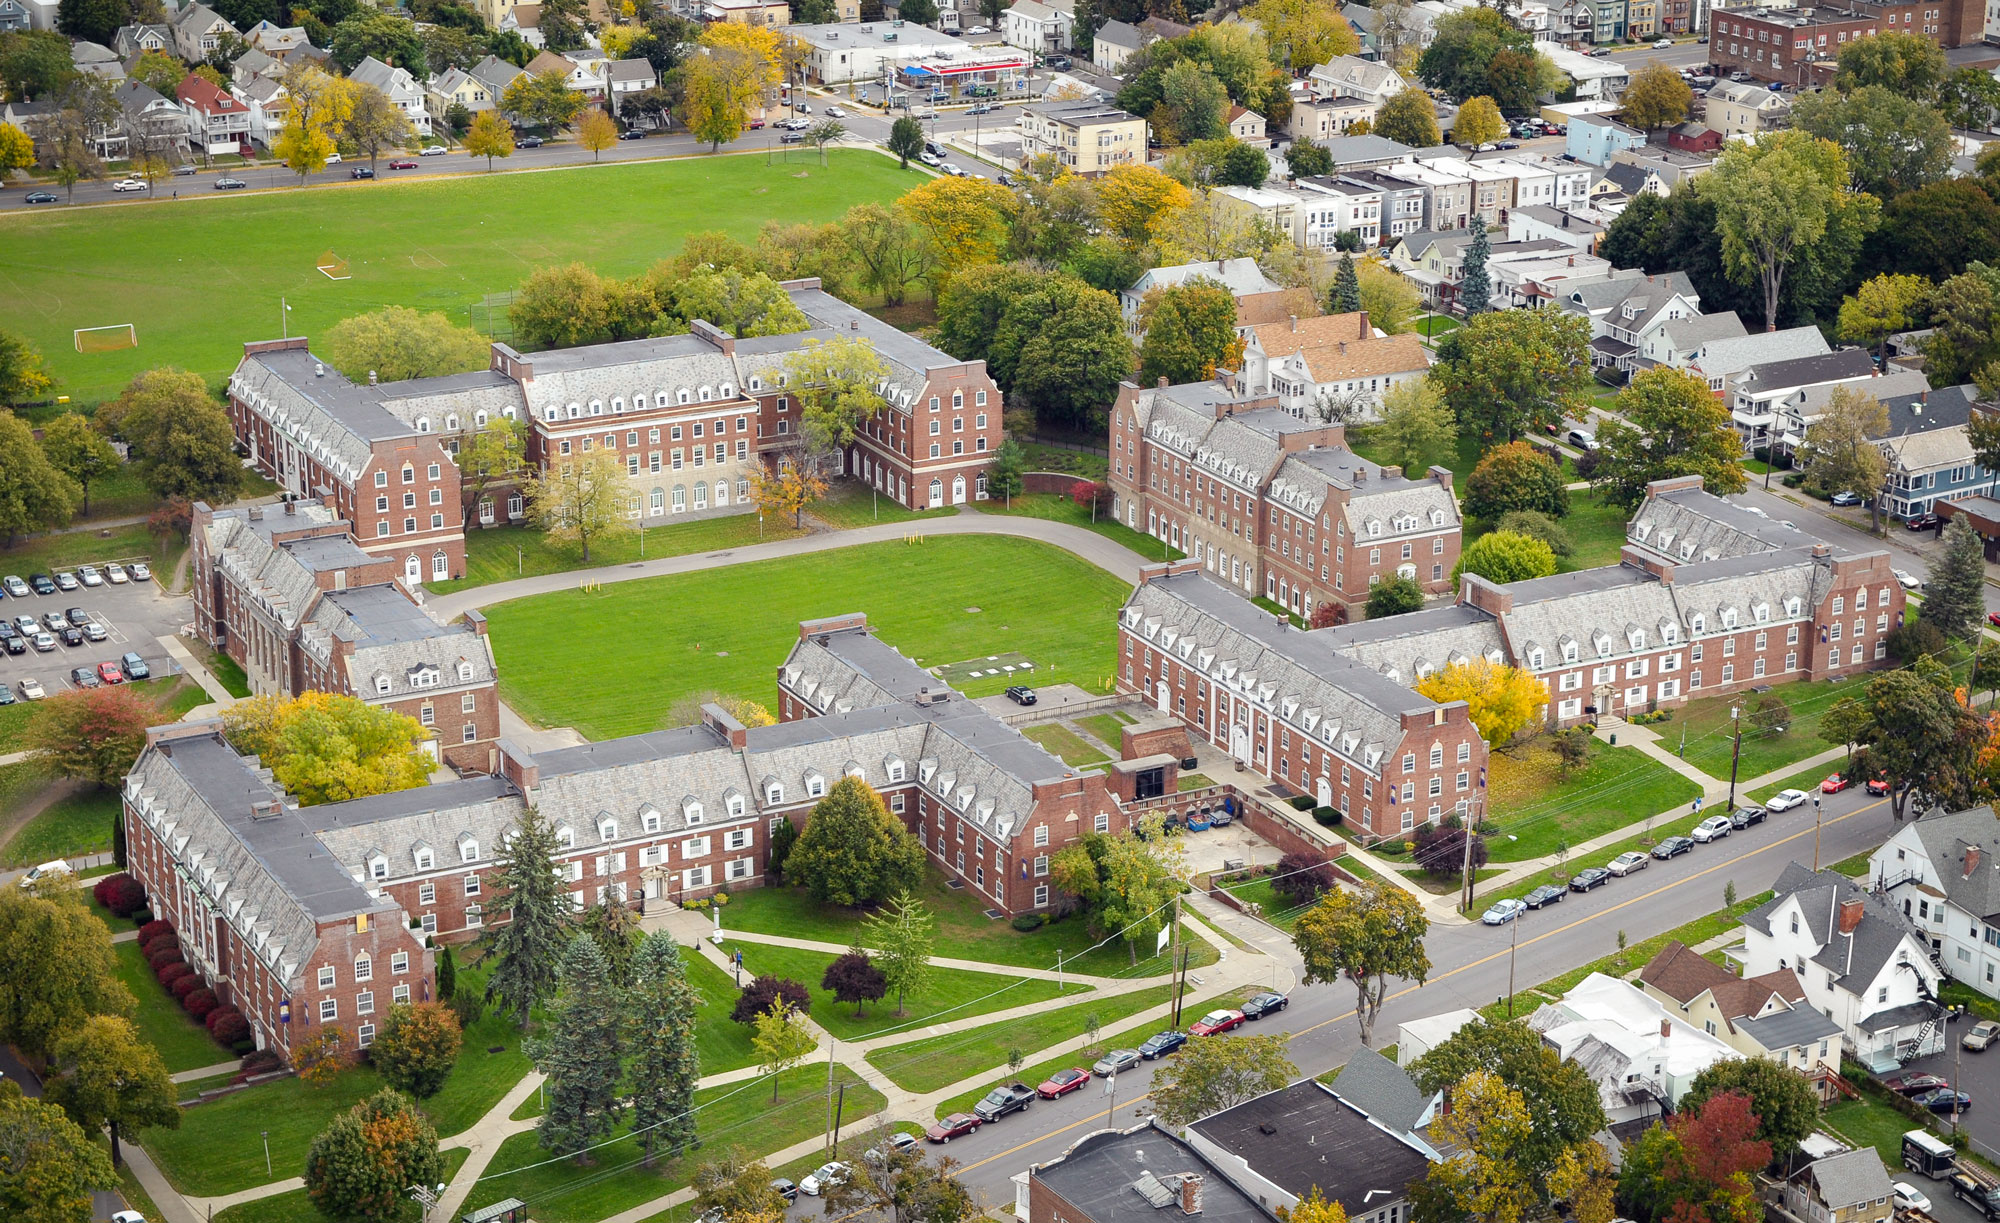 An aerial view of UAlbany's Alumni Quad residence halls, which are brick buildings surrounding a green space.